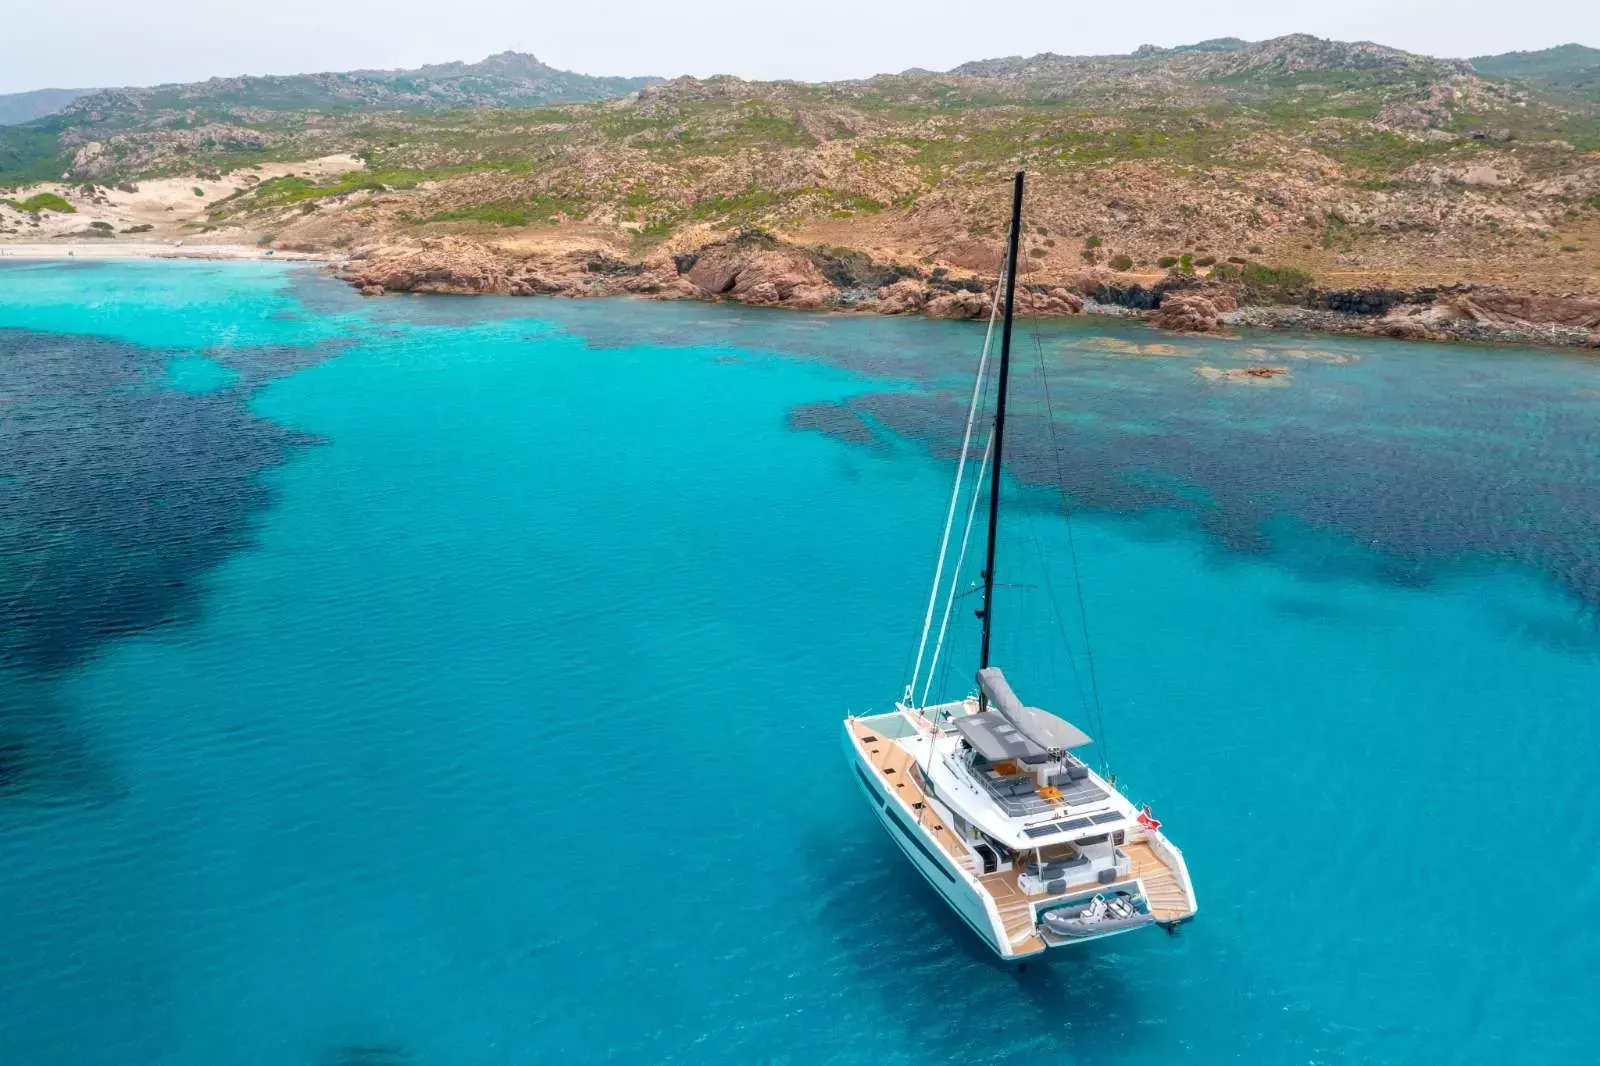 Semper Fidelis by Fountaine Pajot - Top rates for a Rental of a private Sailing Catamaran in Anguilla